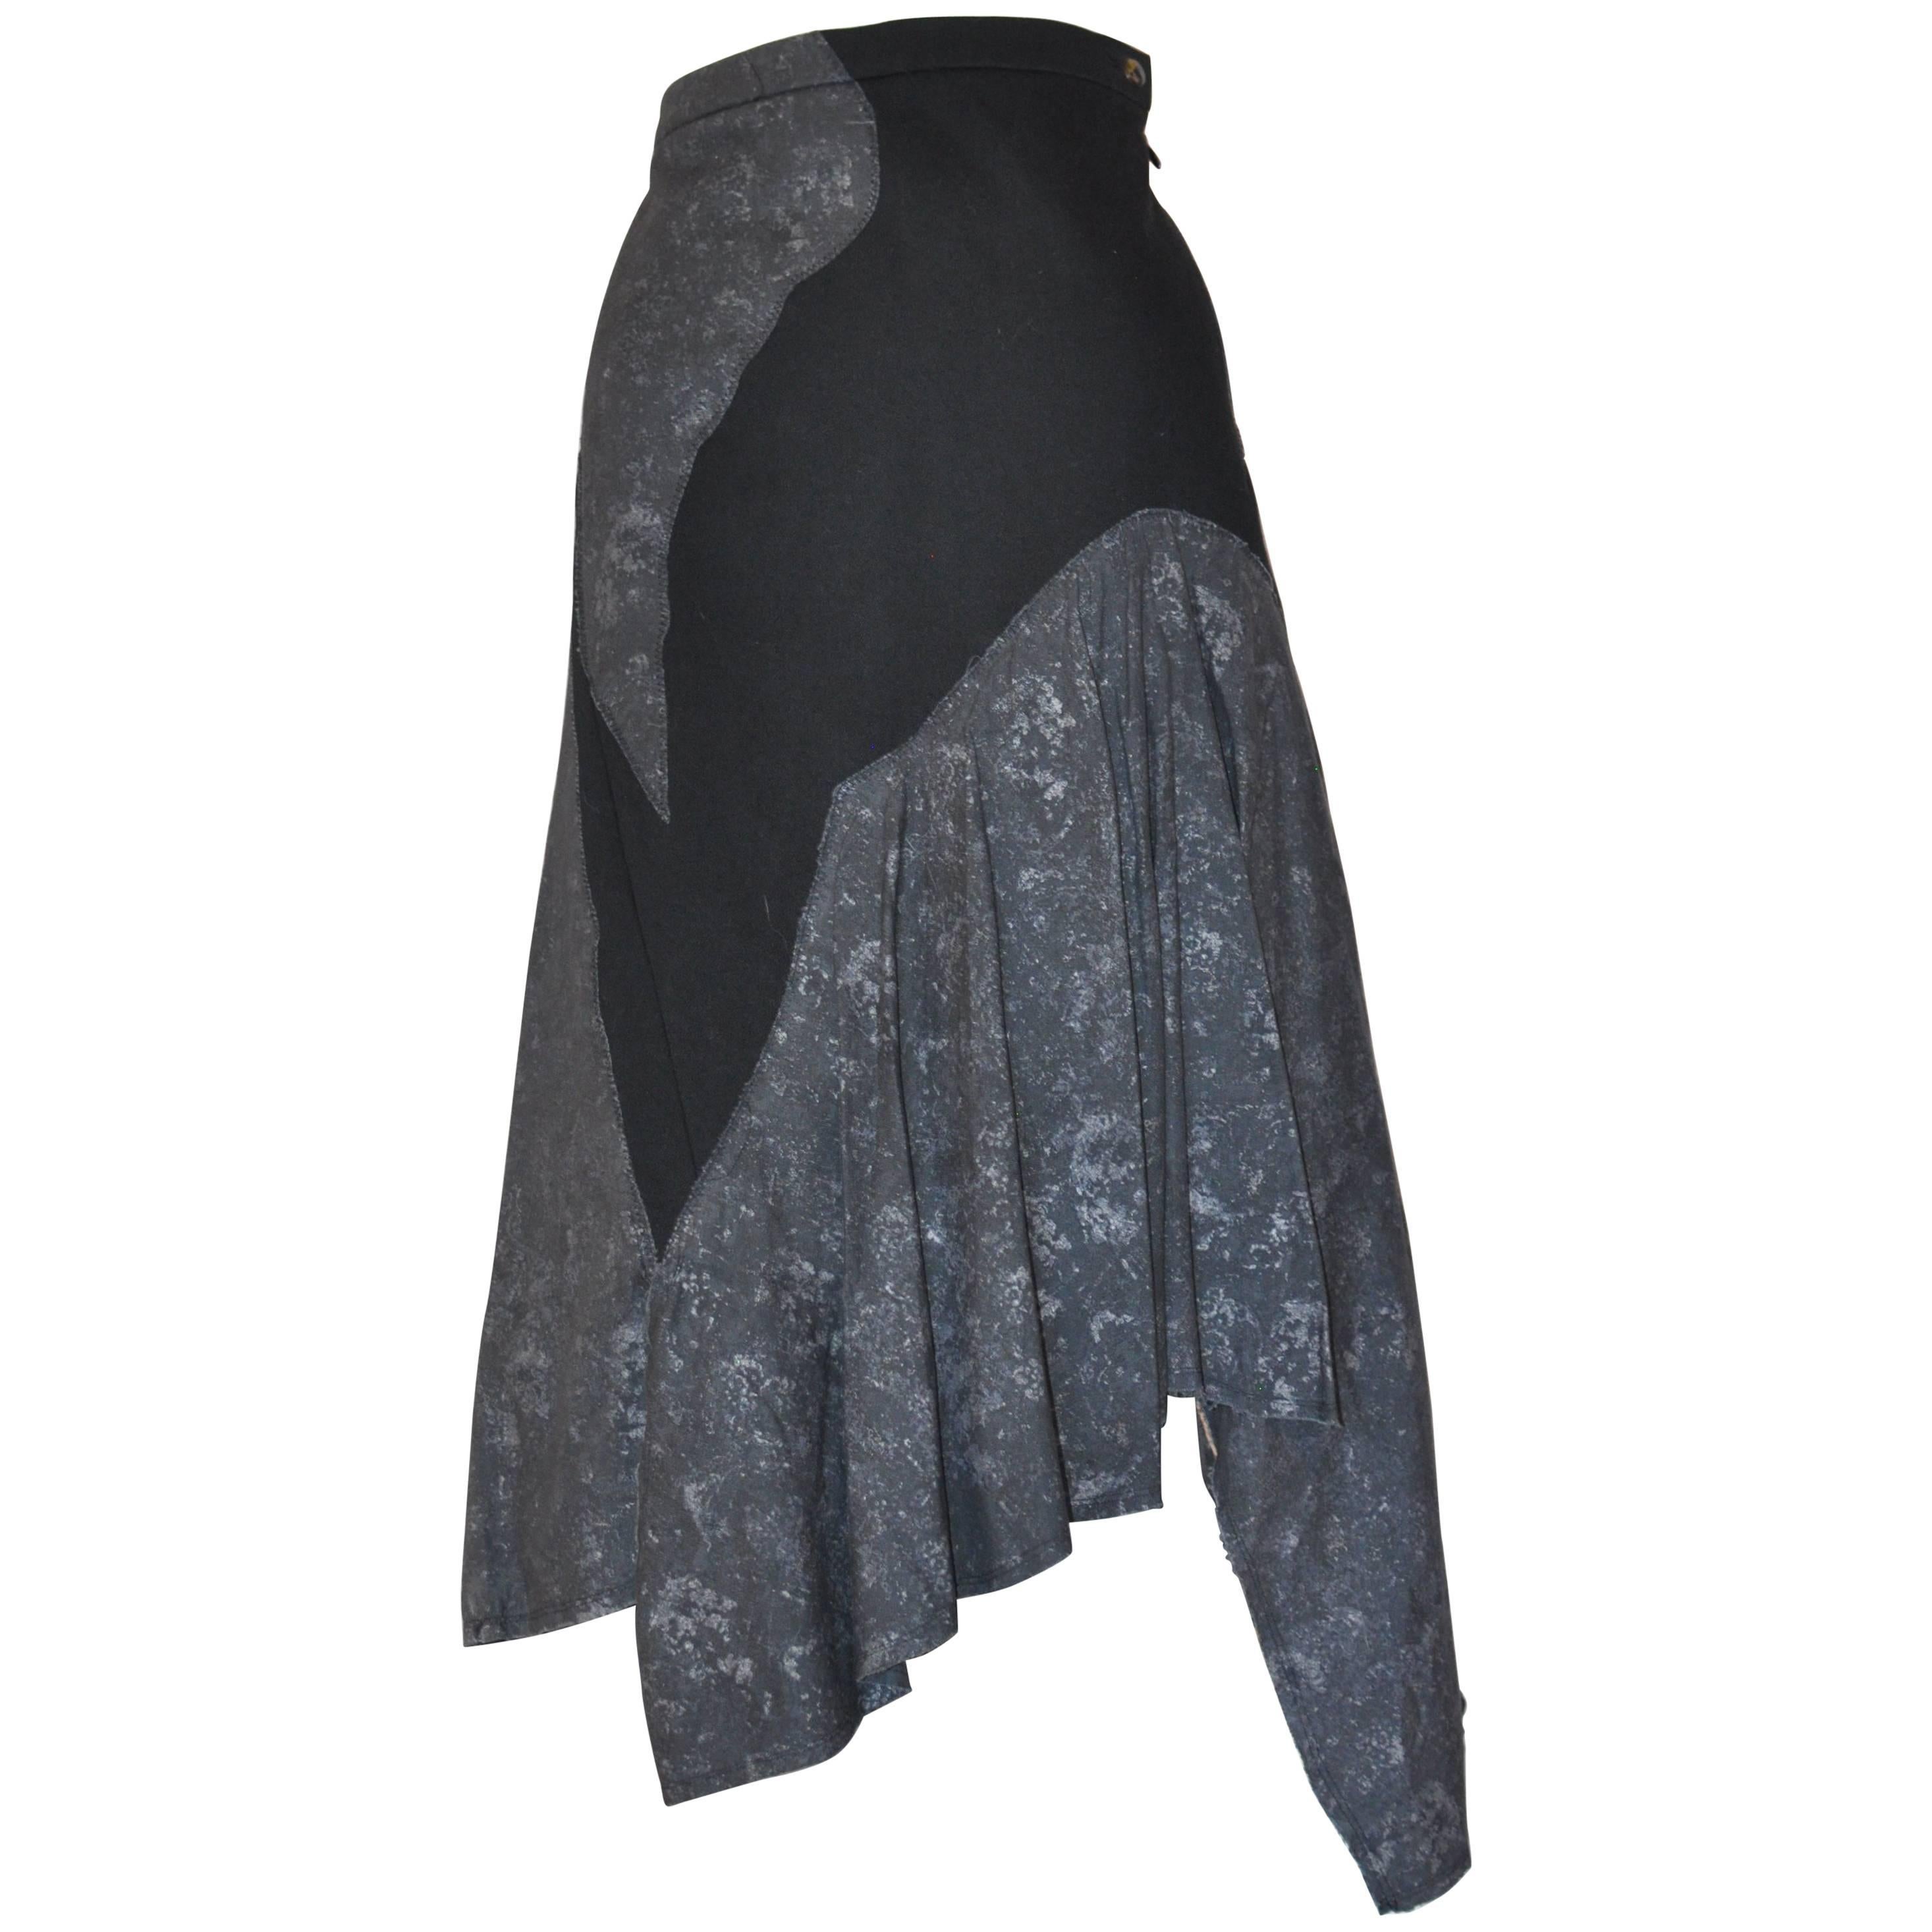 Issey Miyake 1990s Cotton Black and Grey w/Silver Grey Flakes Skirt (Japan 3)